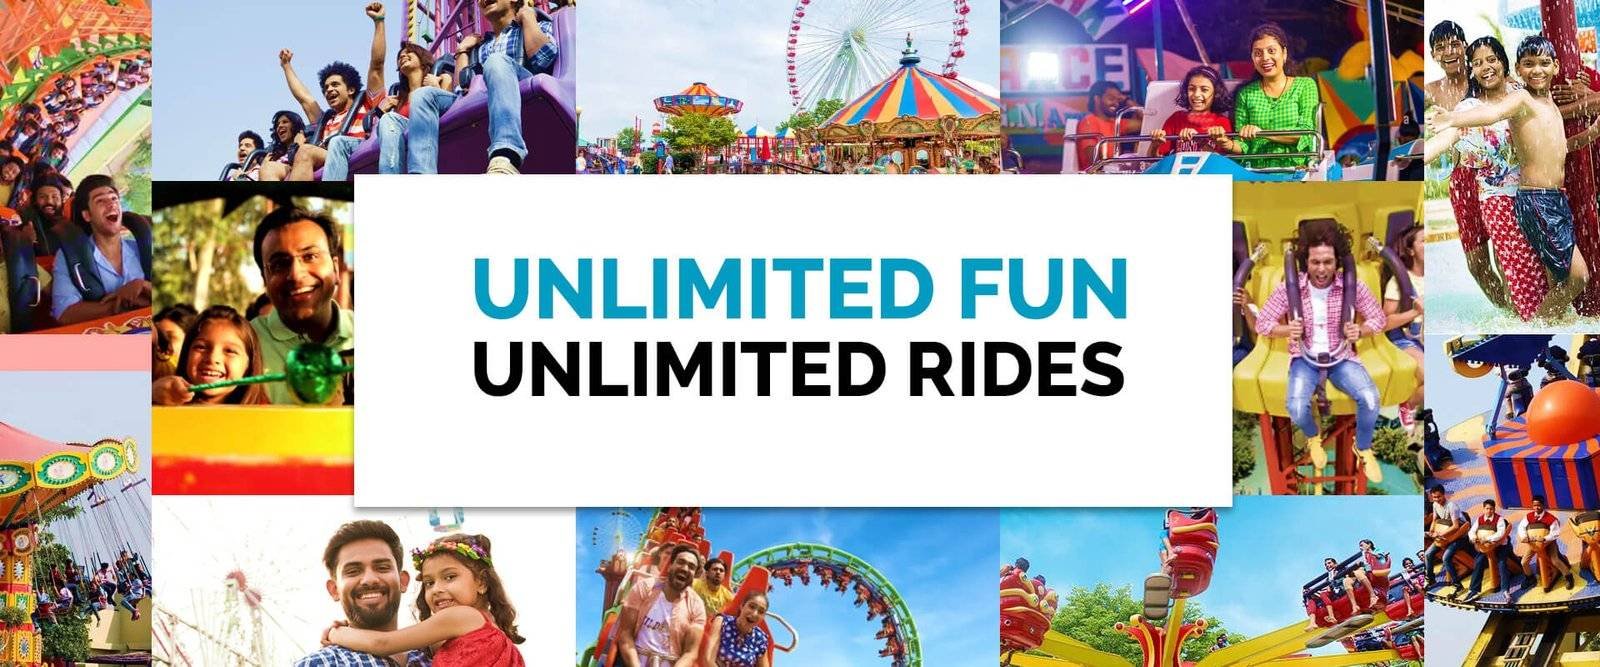 unlimited fun and Rides